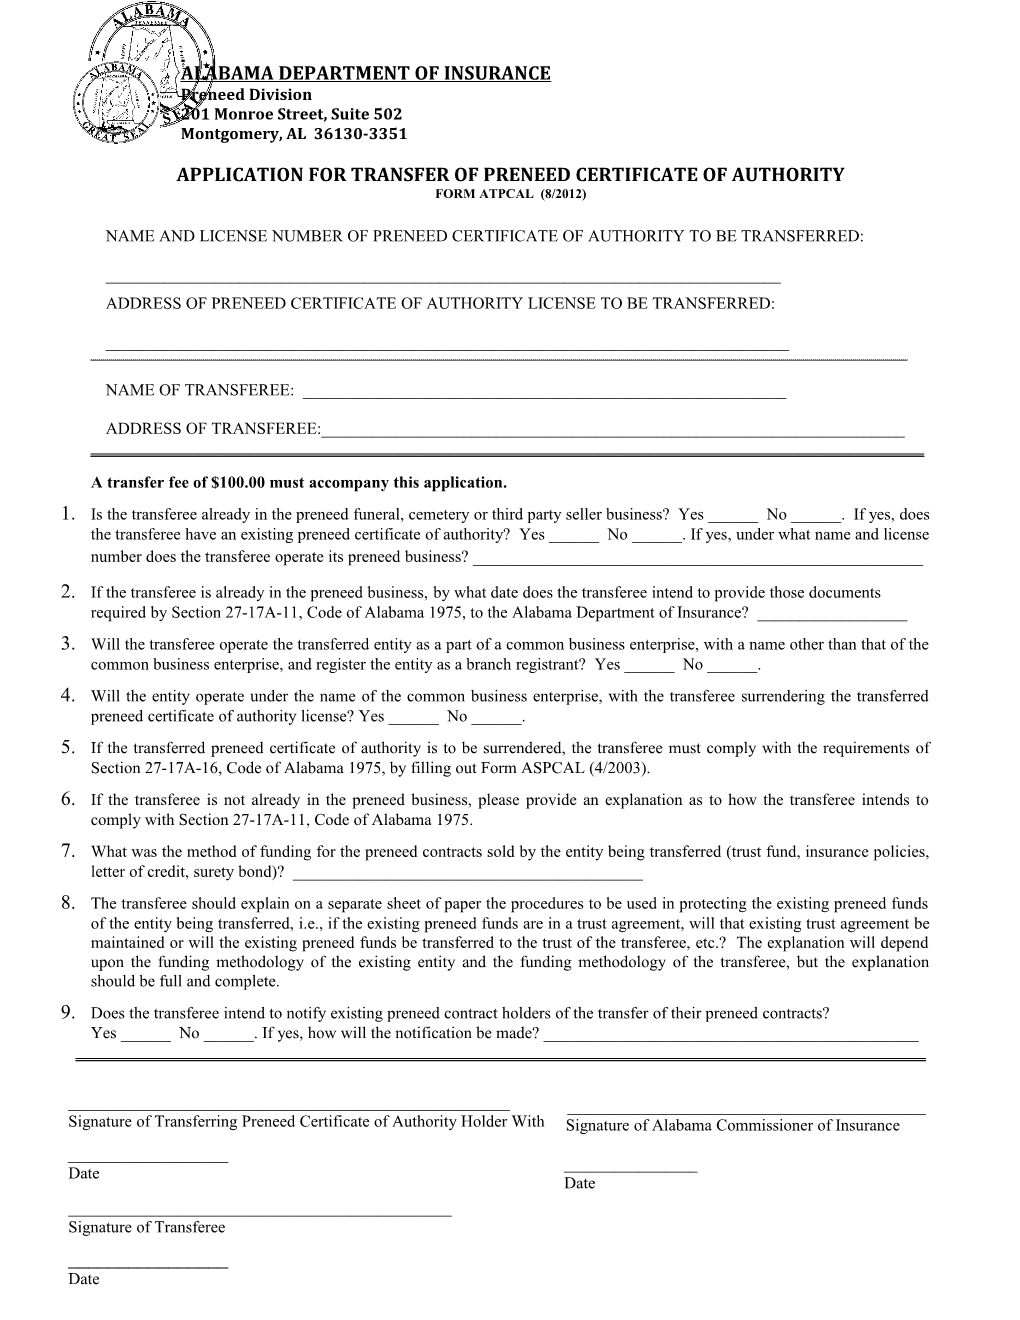 Application for Transfer of Preneed Certificate of Authority